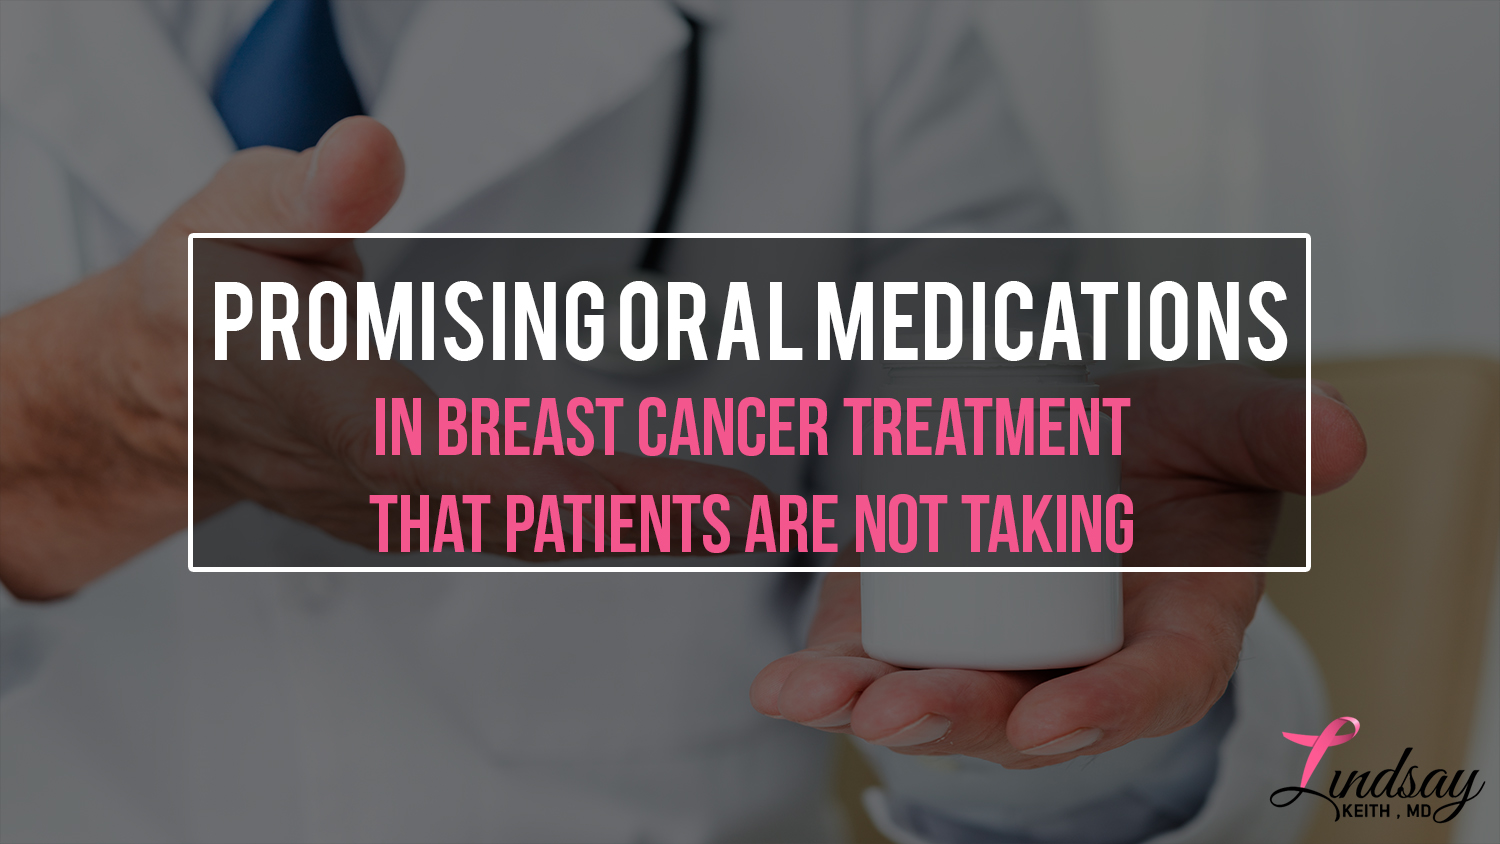 Promising Oral Medications in Breast Cancer Treatment that Patients Are Not Taking